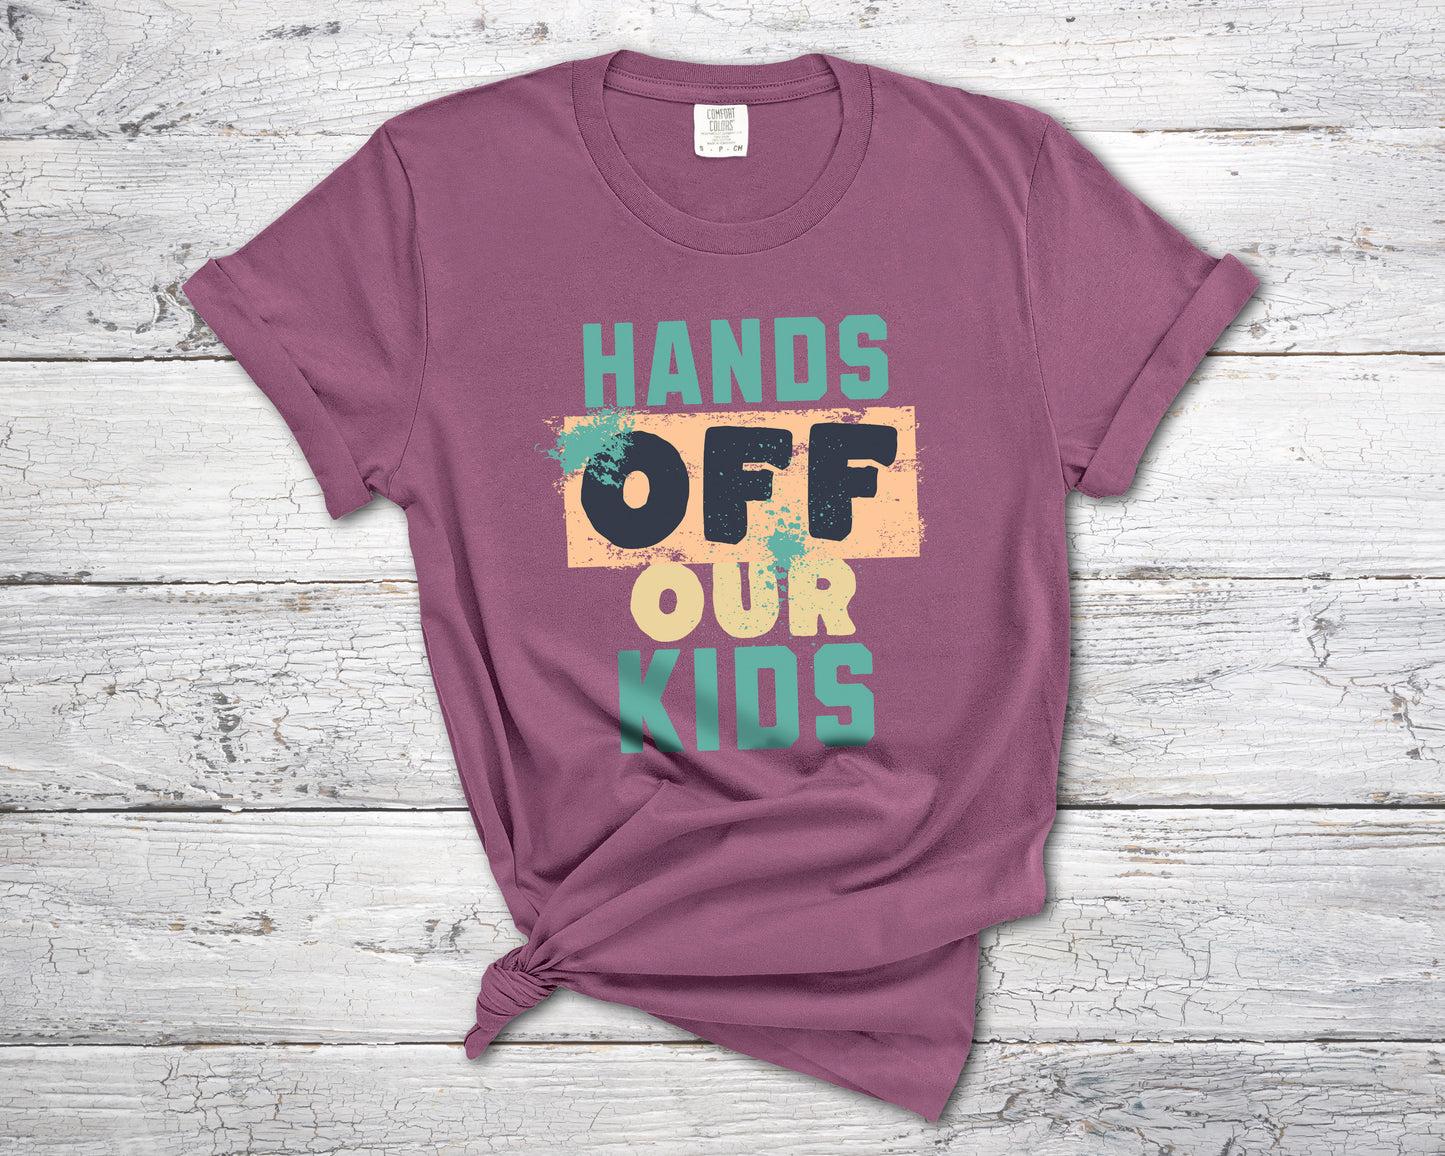 Parent tshirt for protective parents concerned about CRT and LGBTQ agenda in schools-T-Shirts-PureDesignTees